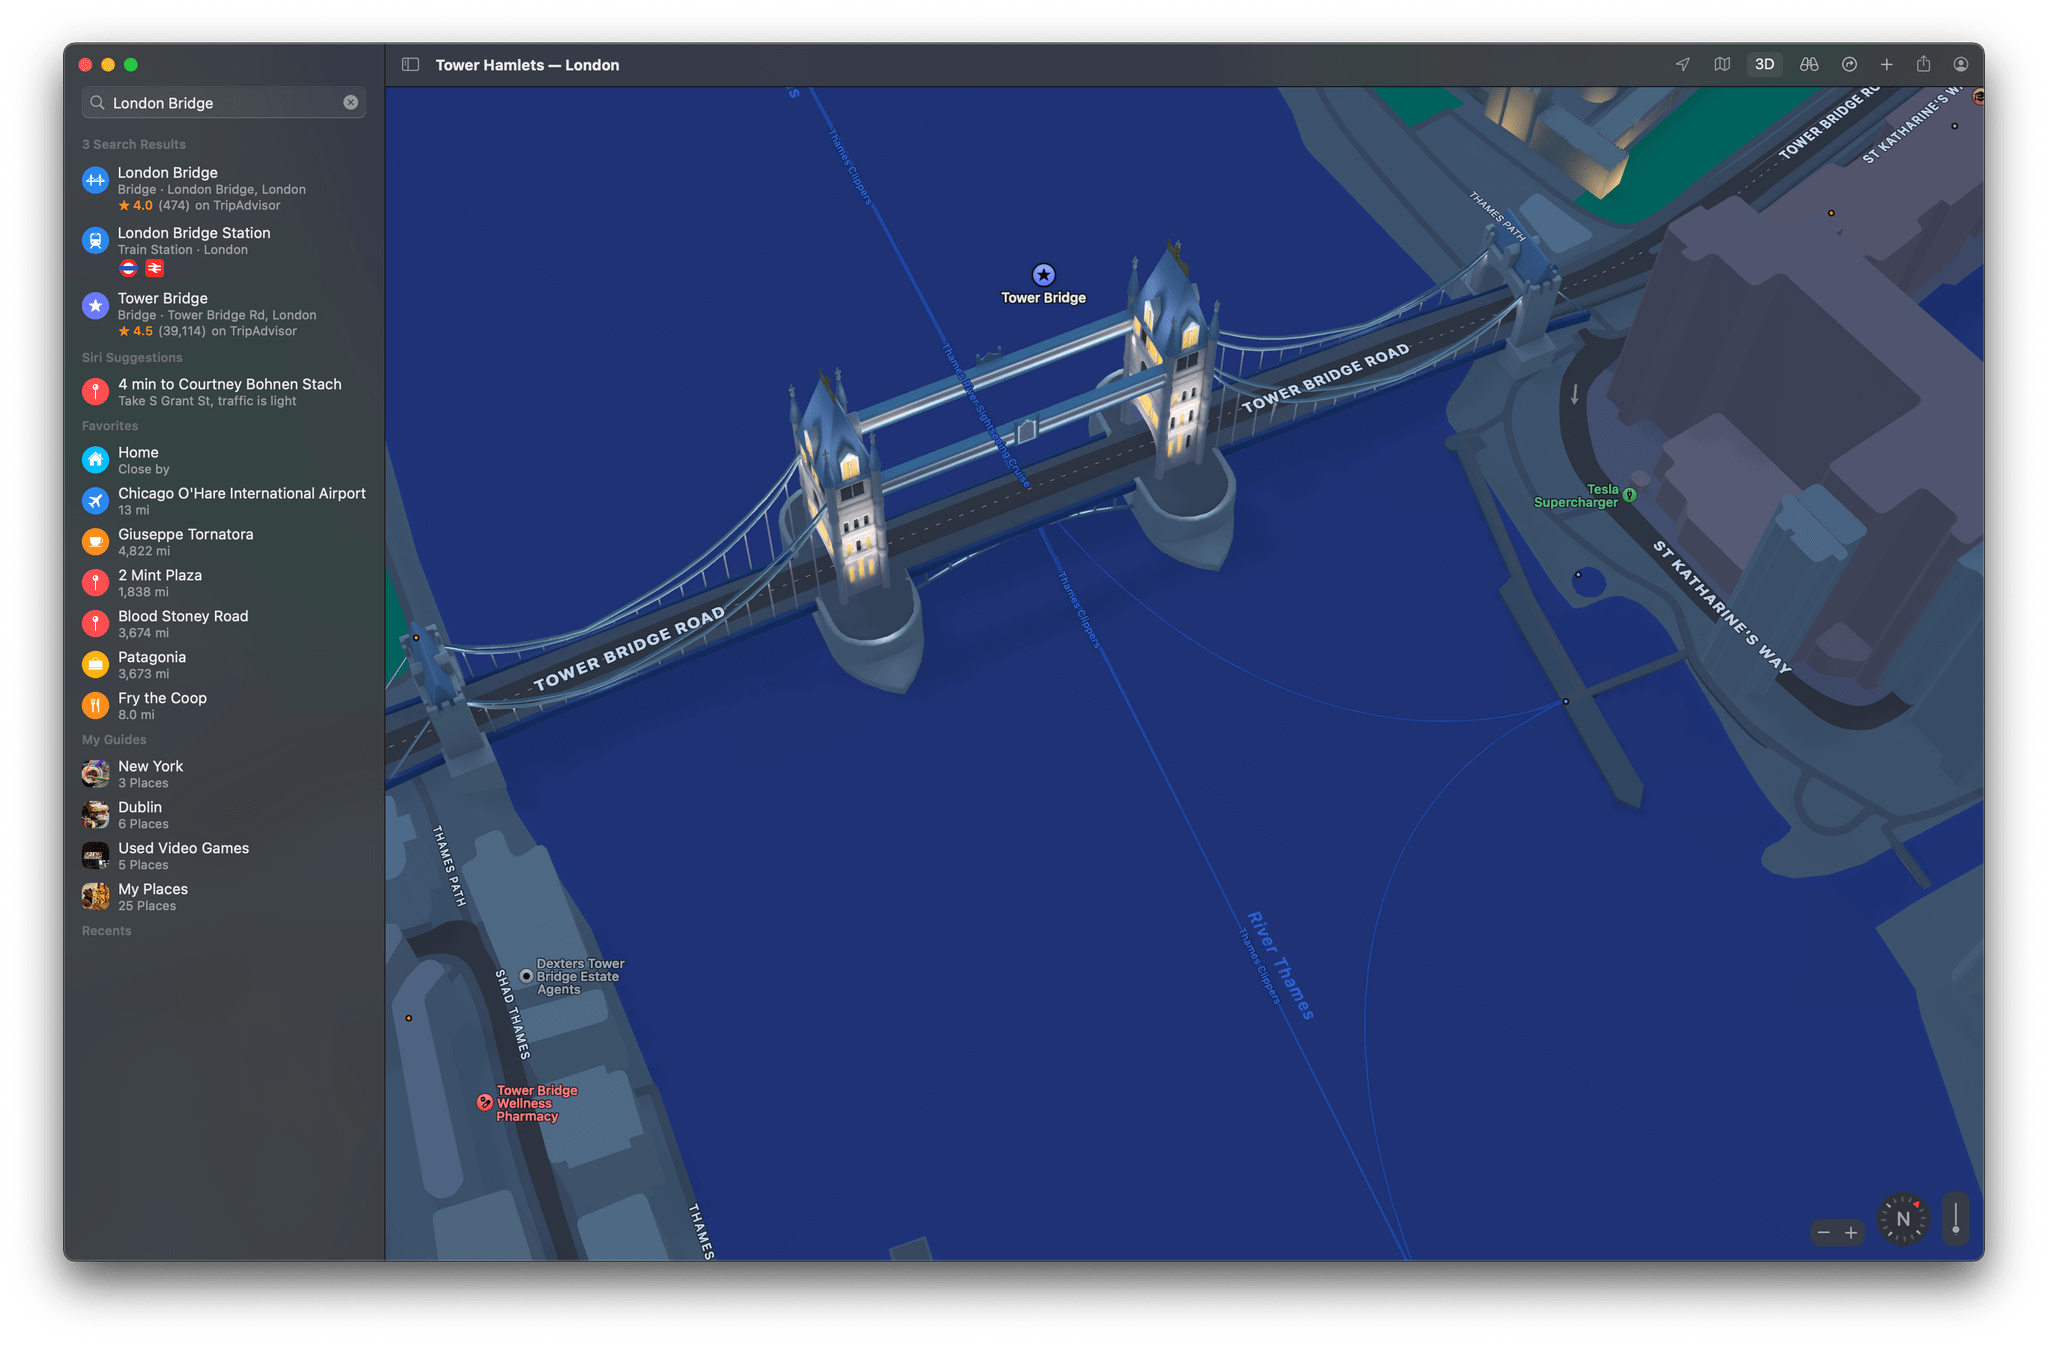 London and other new cities have been added to the lineup of 3D models in Maps.